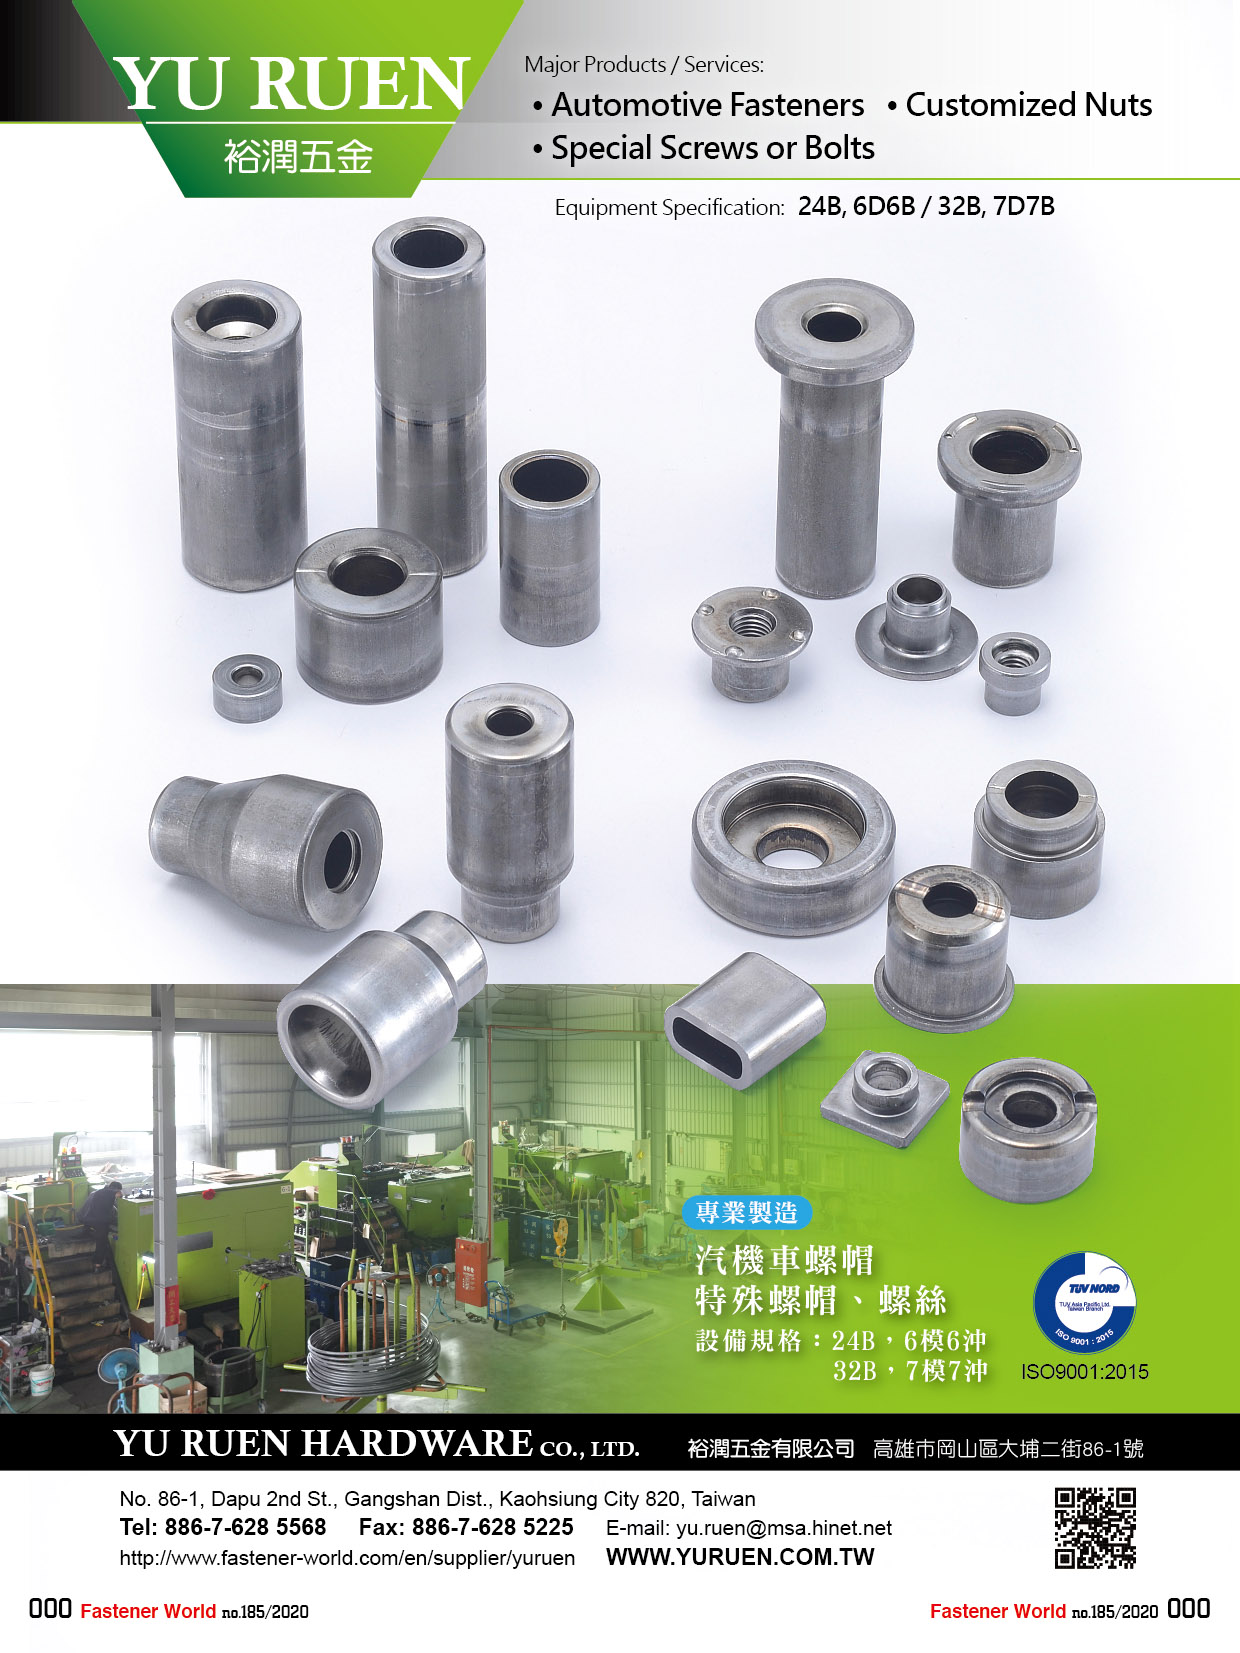 YU RUEN HARDWARE CO., LTD. , Automotive Fasteners, Customized Nuts, Special Screws or Bolts , Automotive Parts